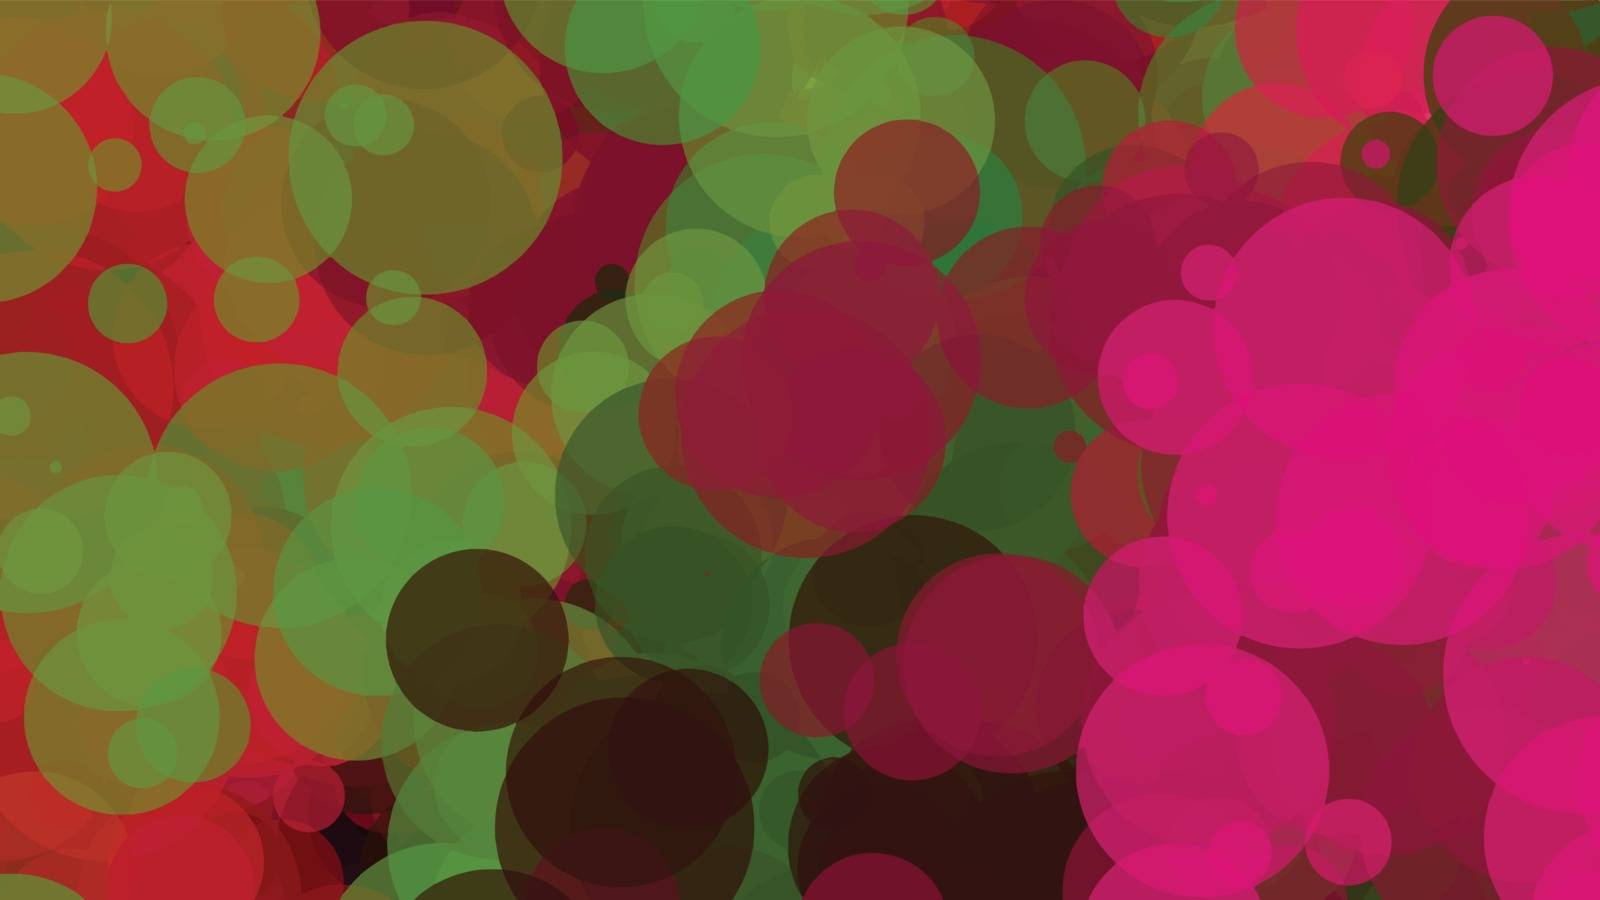 Magenta, red, and green bubbles, grunge background vector. Ink splatter, blots, spot elements. Watercolor paint splashes pattern, fluid stains spots background.